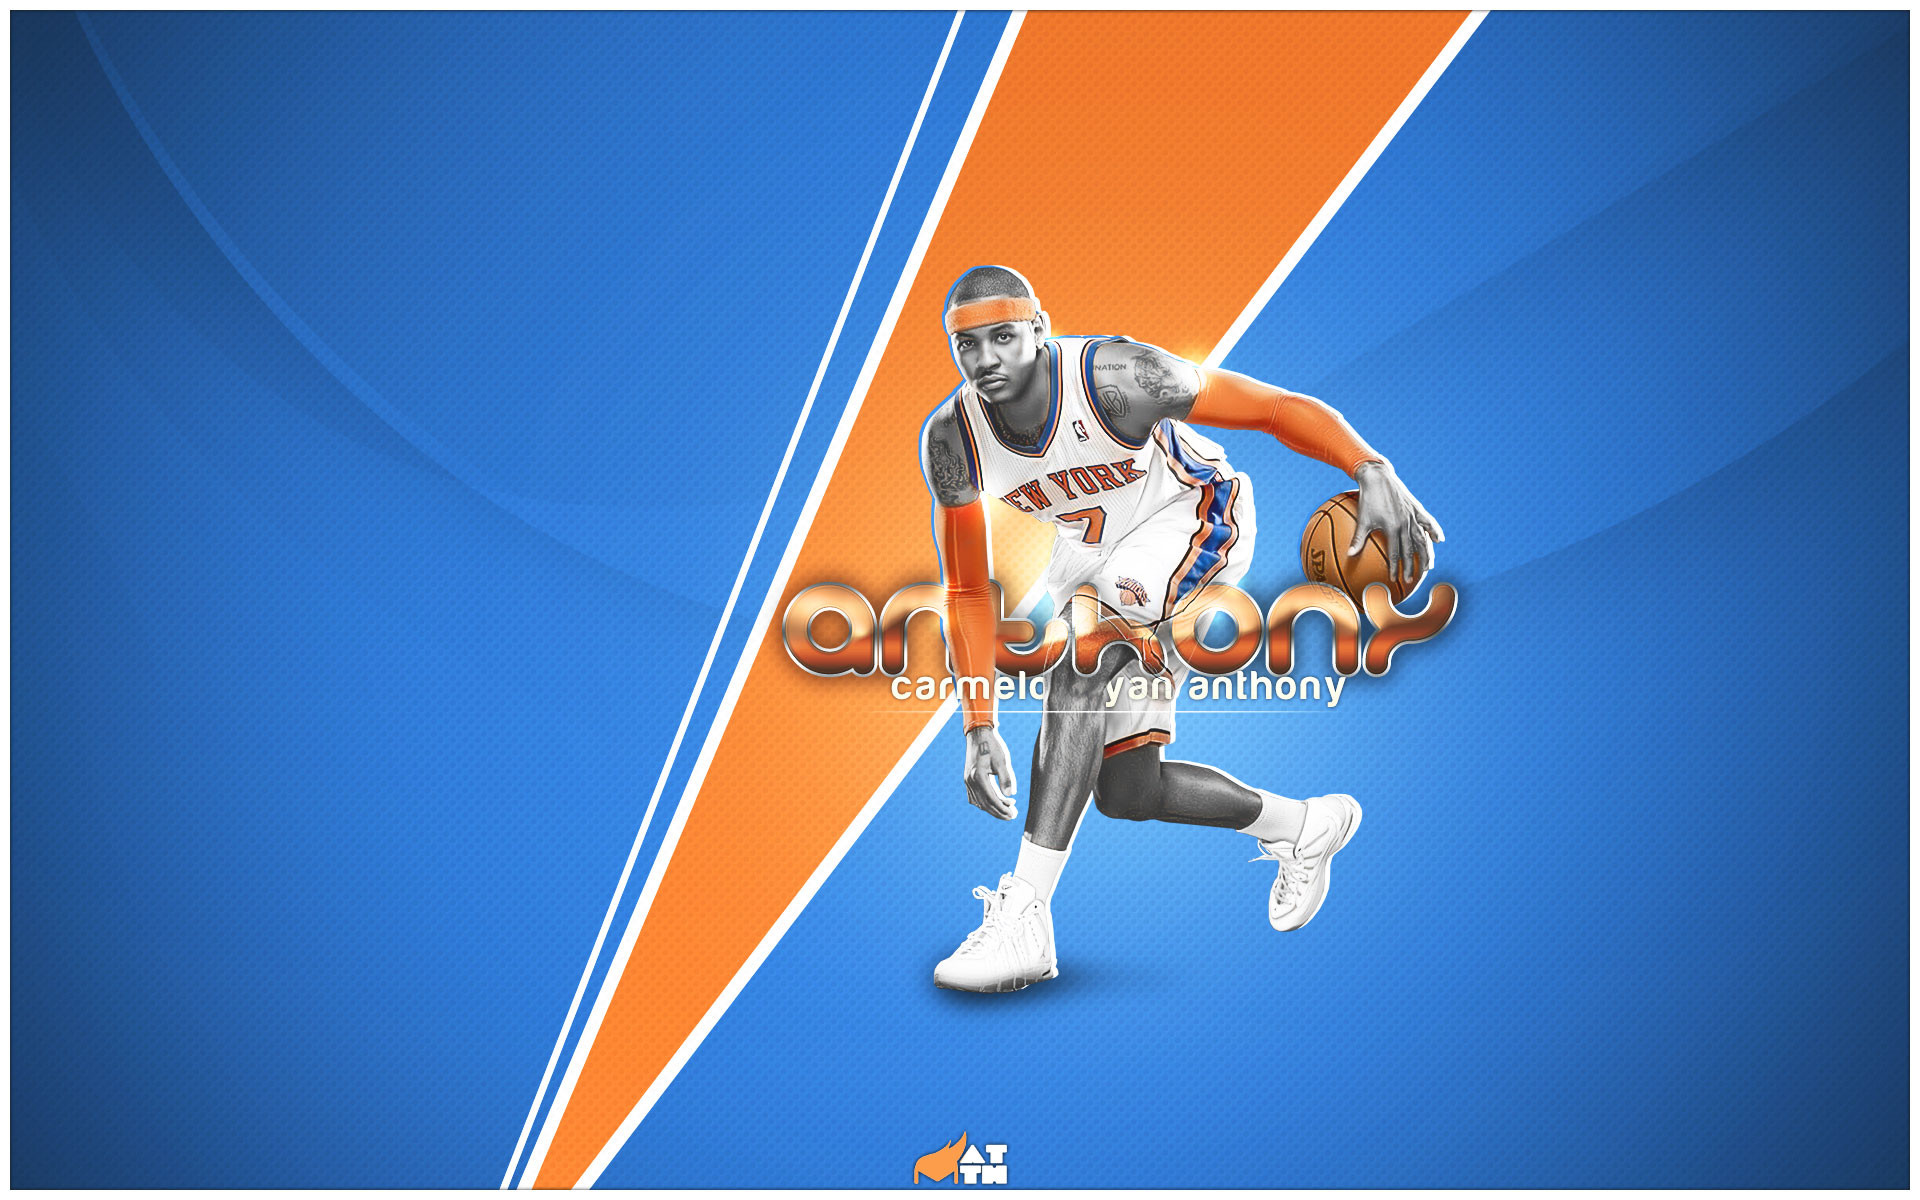 1920x1200 Carmelo Anthony Wallpaper - With Knicks-Colored Background and His Name  Printed, Sure It